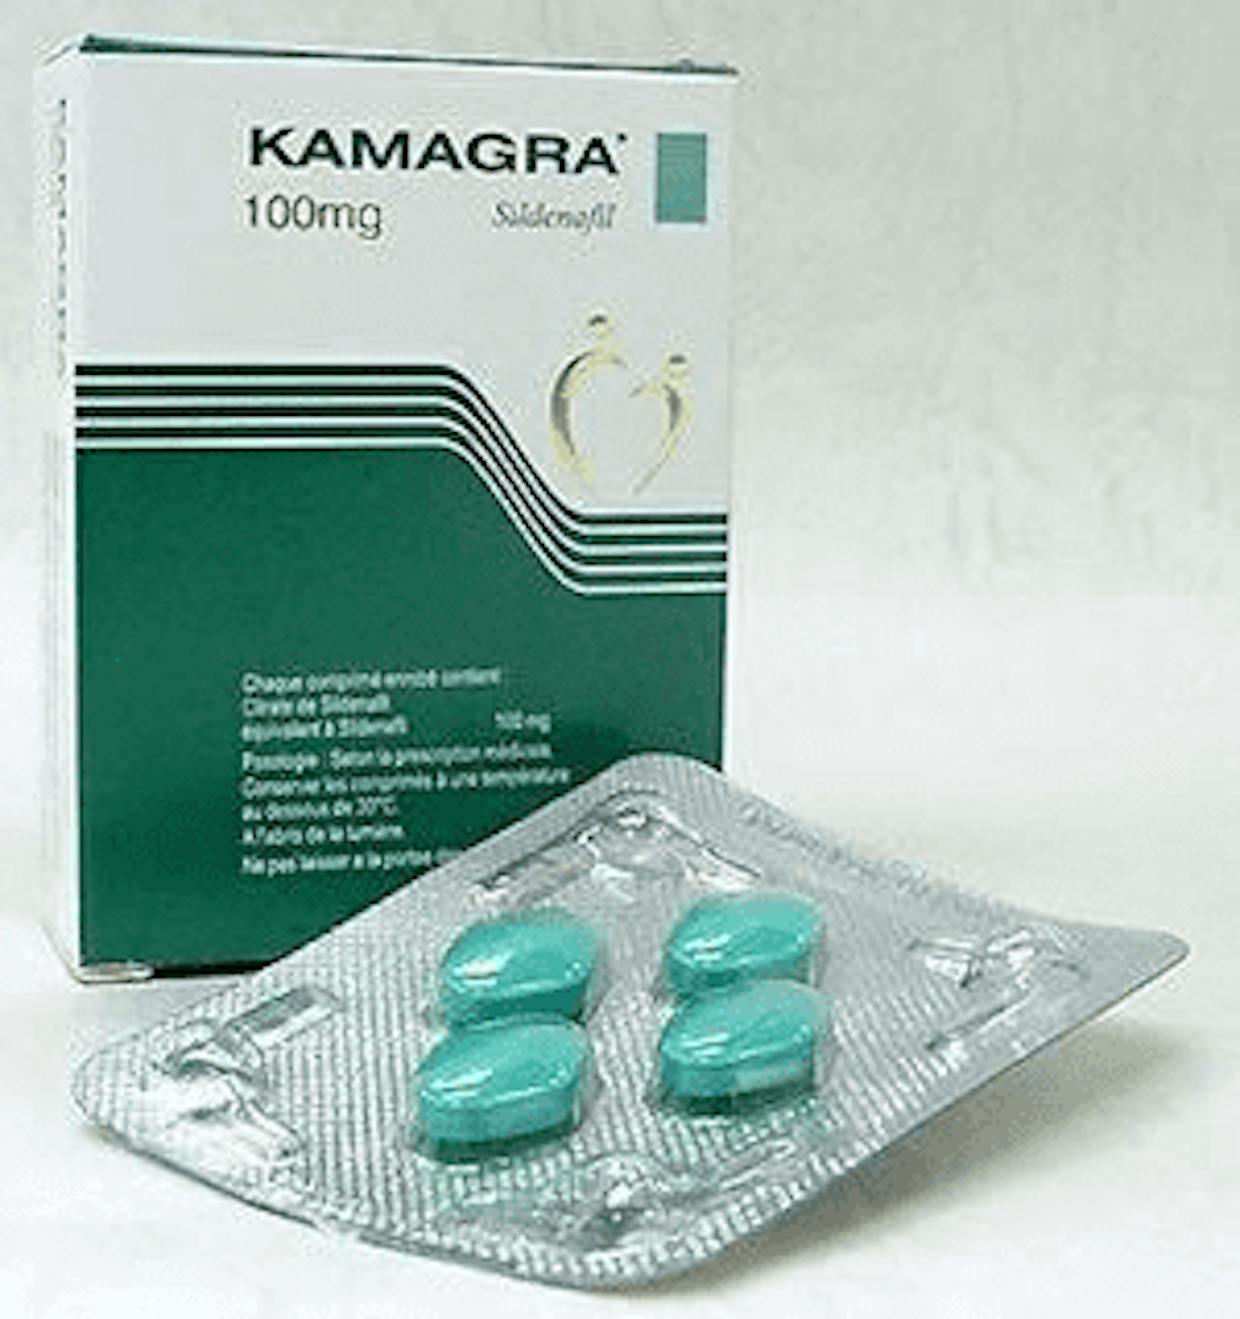 Kamagra 100mg Tablet is a phosphodiesterase type 5 inhibitor that helps to relax as well as dilate the blood vessels in the body. It helps to increase the flow of blood in certain parts of the body. This medication can be used for treating erectile dysfunction among men. It also treats pulmonary arterial hypertension (PAH), and eventually improves the exercising capacity in men as well as women. It can be taken orally or injected in the body by your doctor.